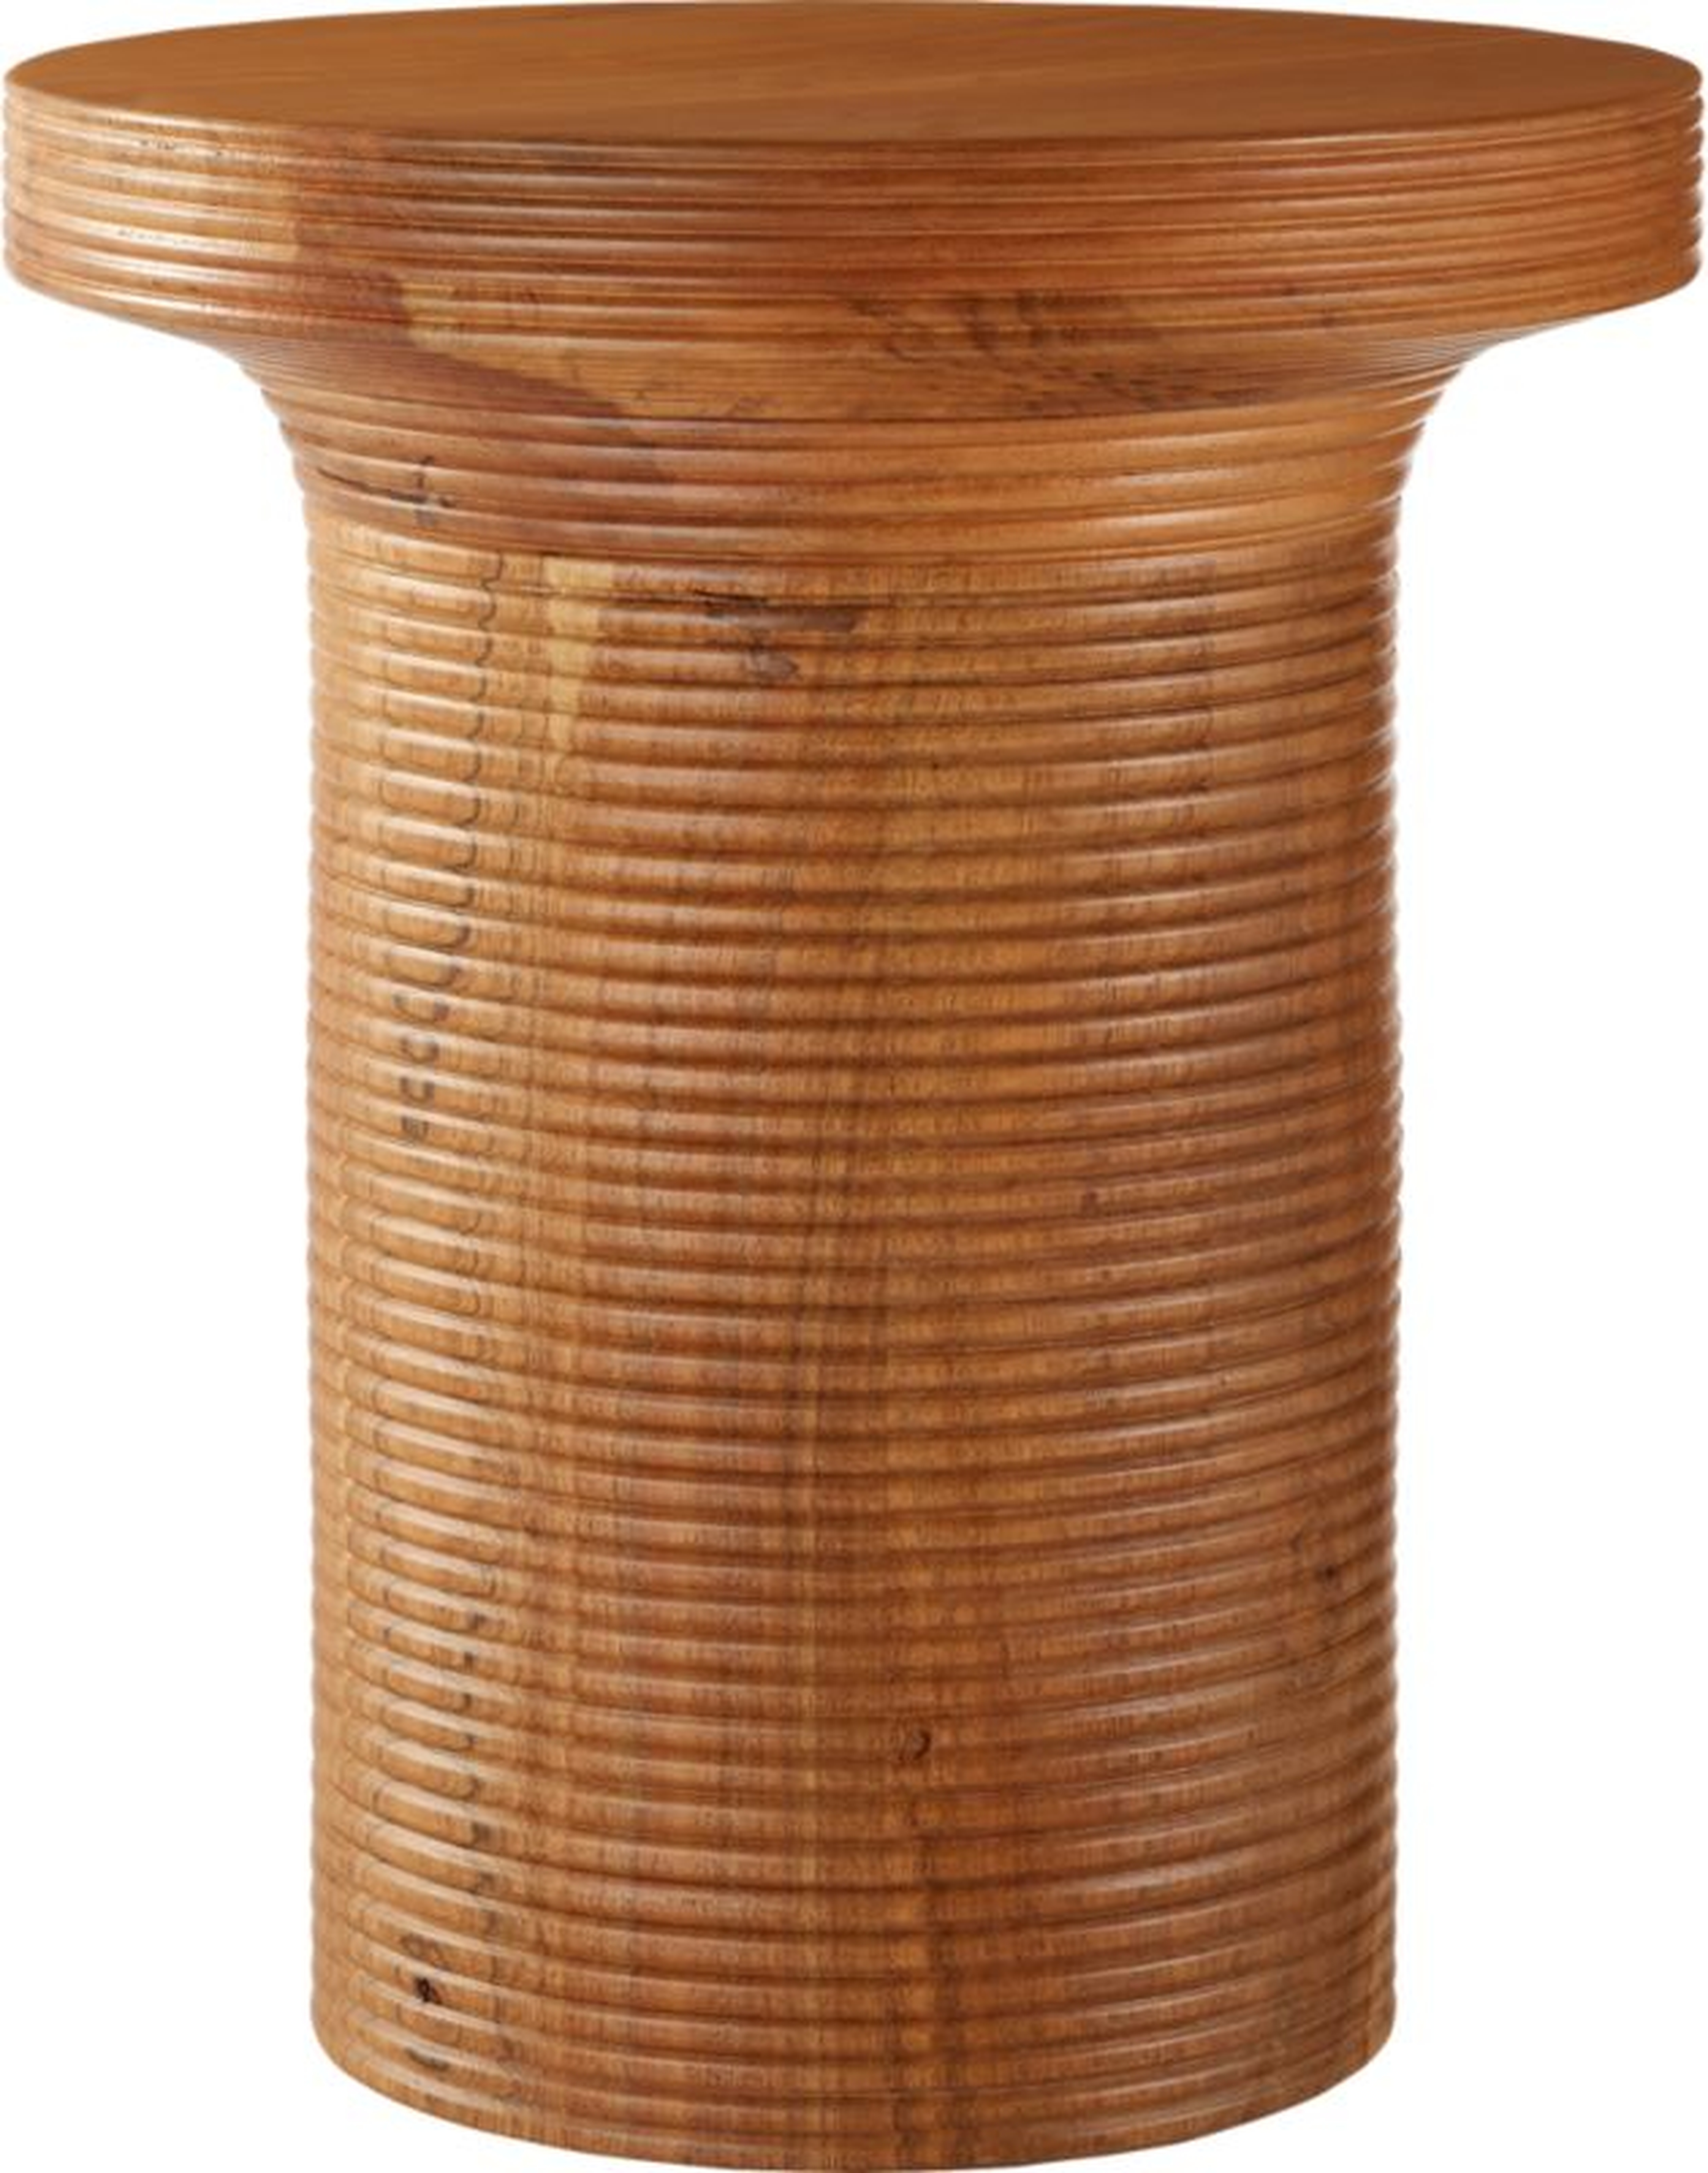 Trill Round Wood Side Table - CB2